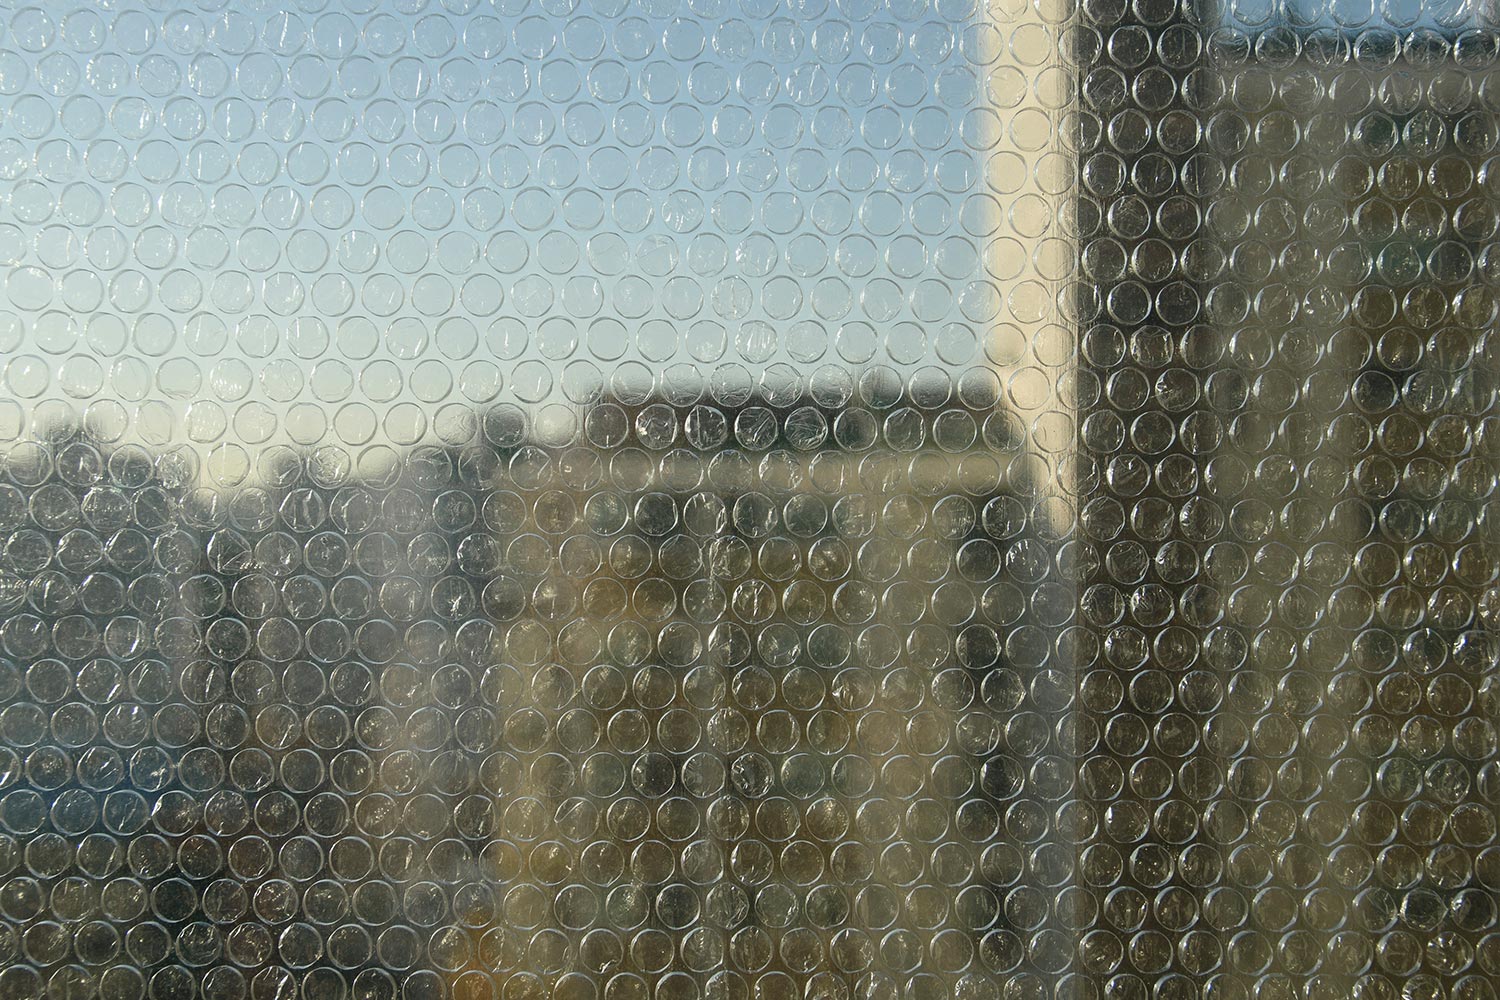 Bubble wrap packaging attached to windows together as insulation for winter